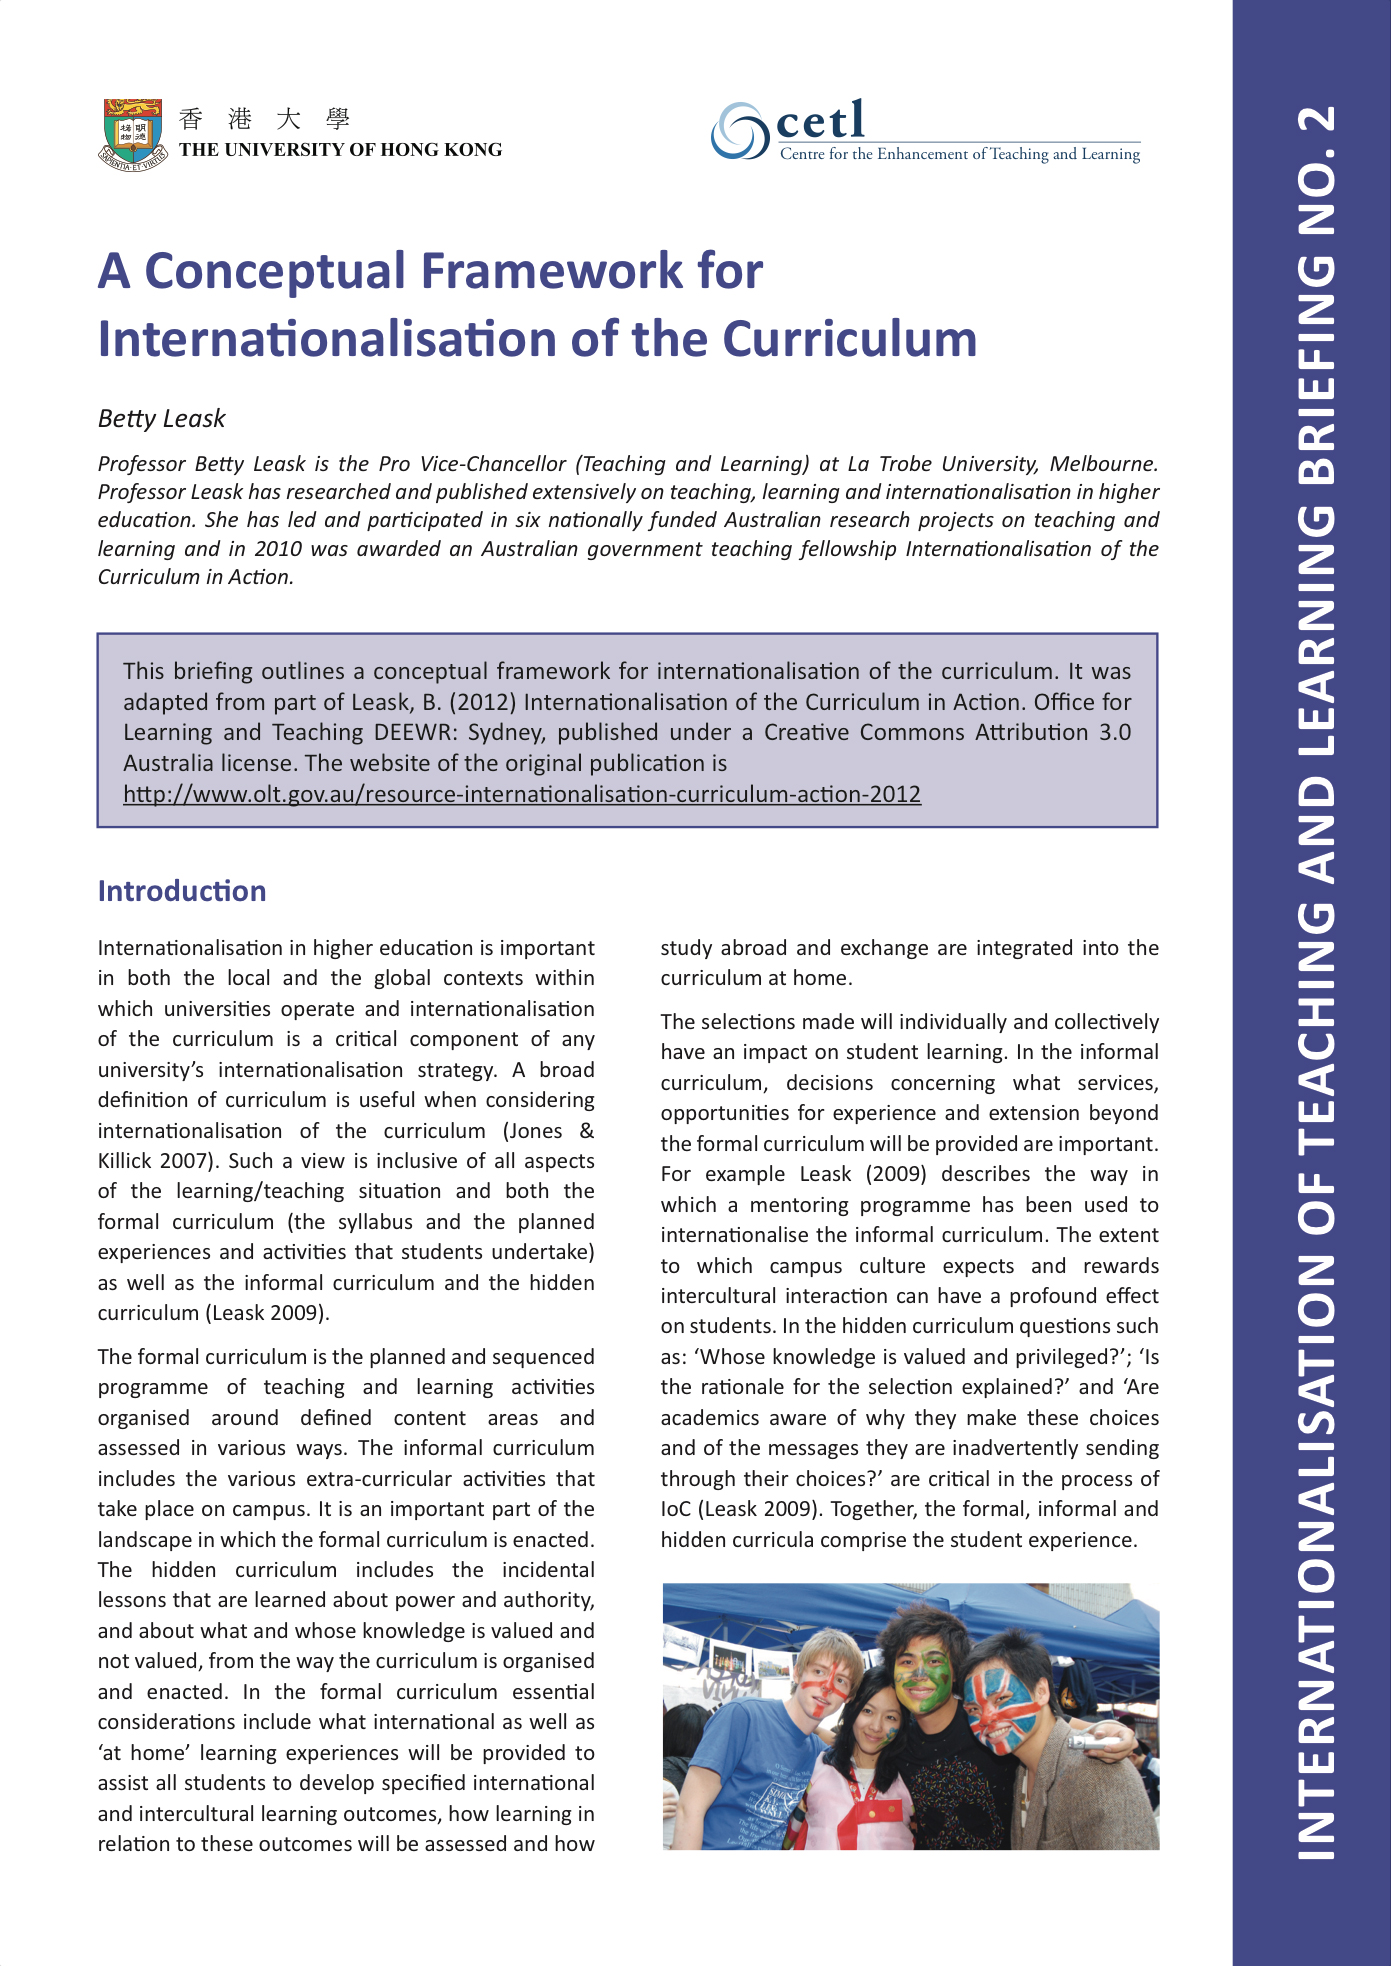 2. A Conceptual Framework for Internationalisation of the Curriculum